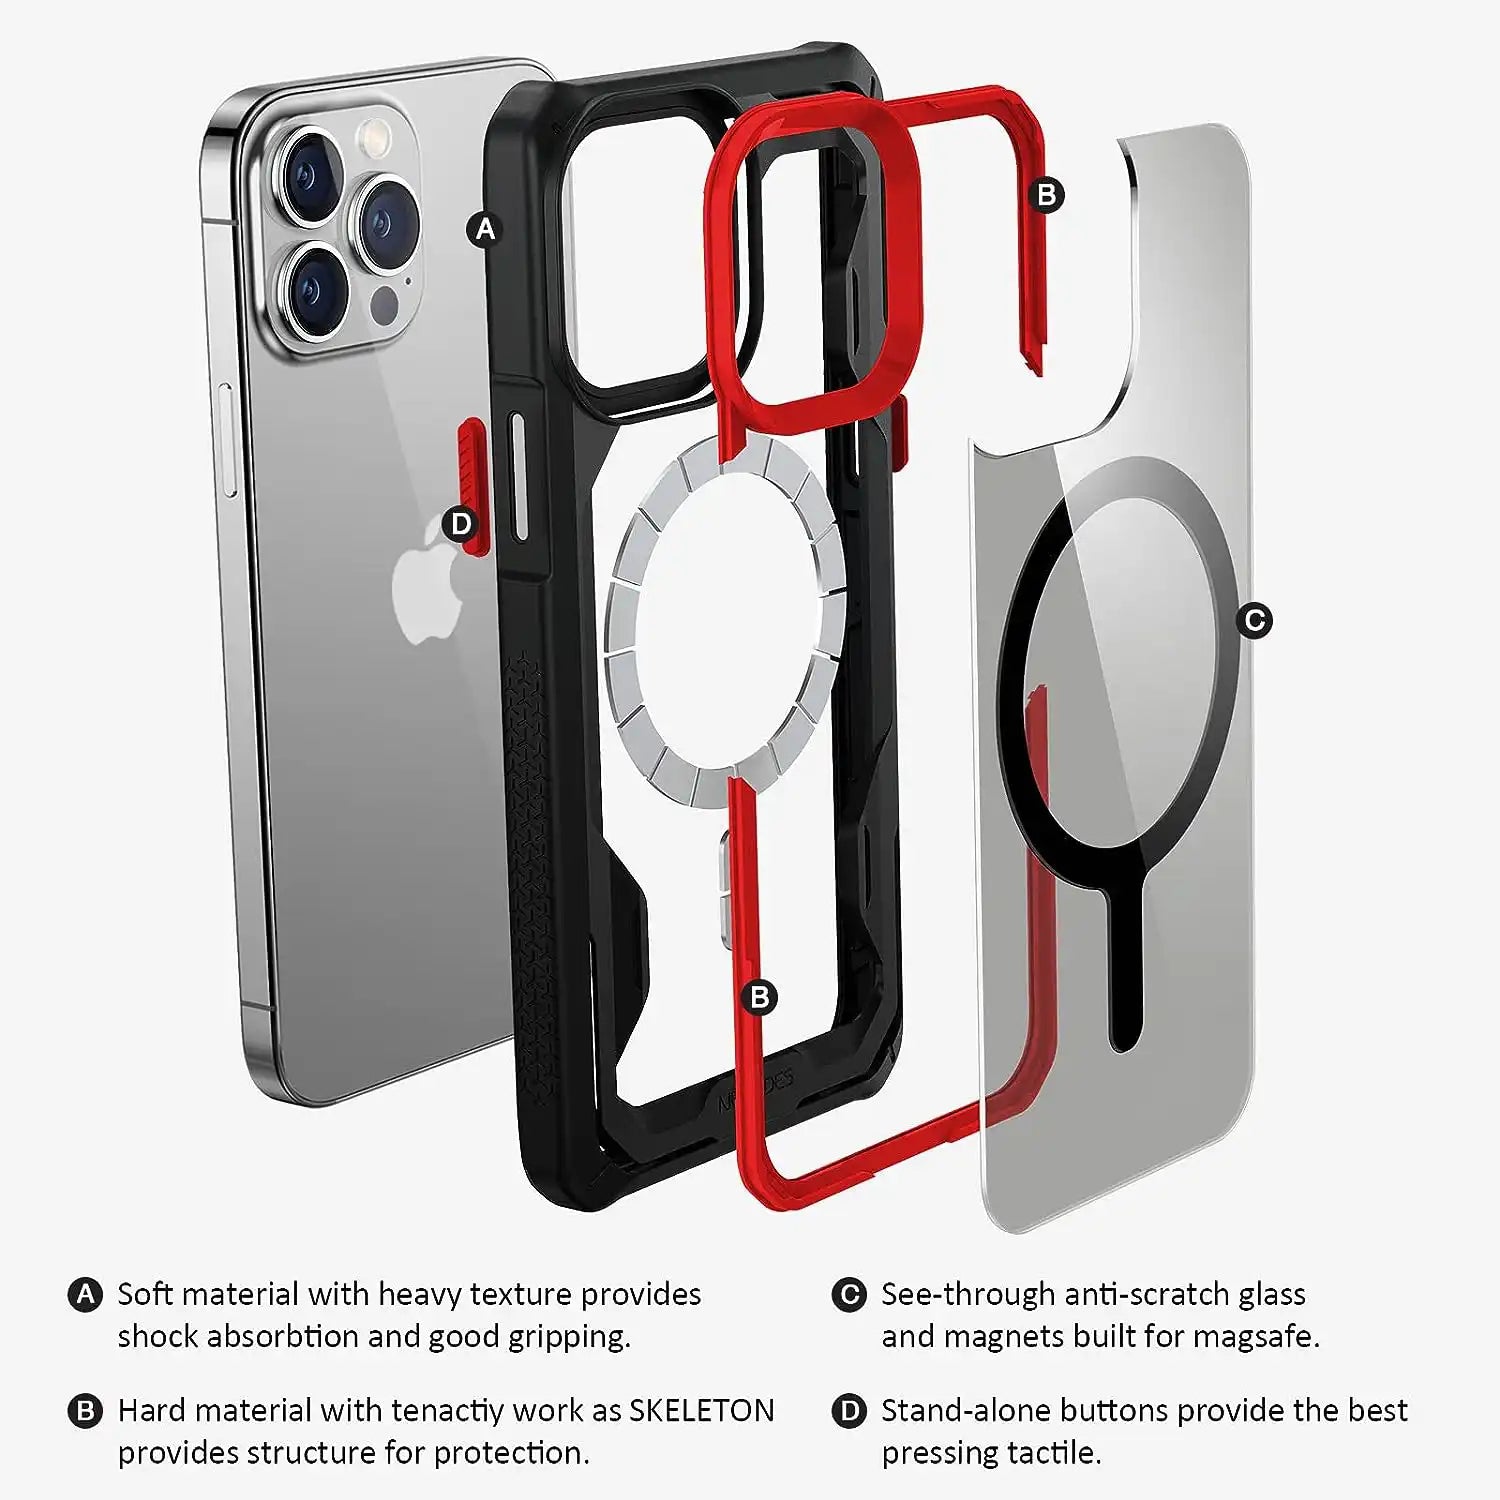 ULTIMAL Slim Shockproof Drop Protection Bumper Case Compatible with Magsafe, Rugged Military Cover with Lightweight Sporty Design Case for iPhone 14 Pro 6.1" /  iPhone 14 Pro Max 6.7"